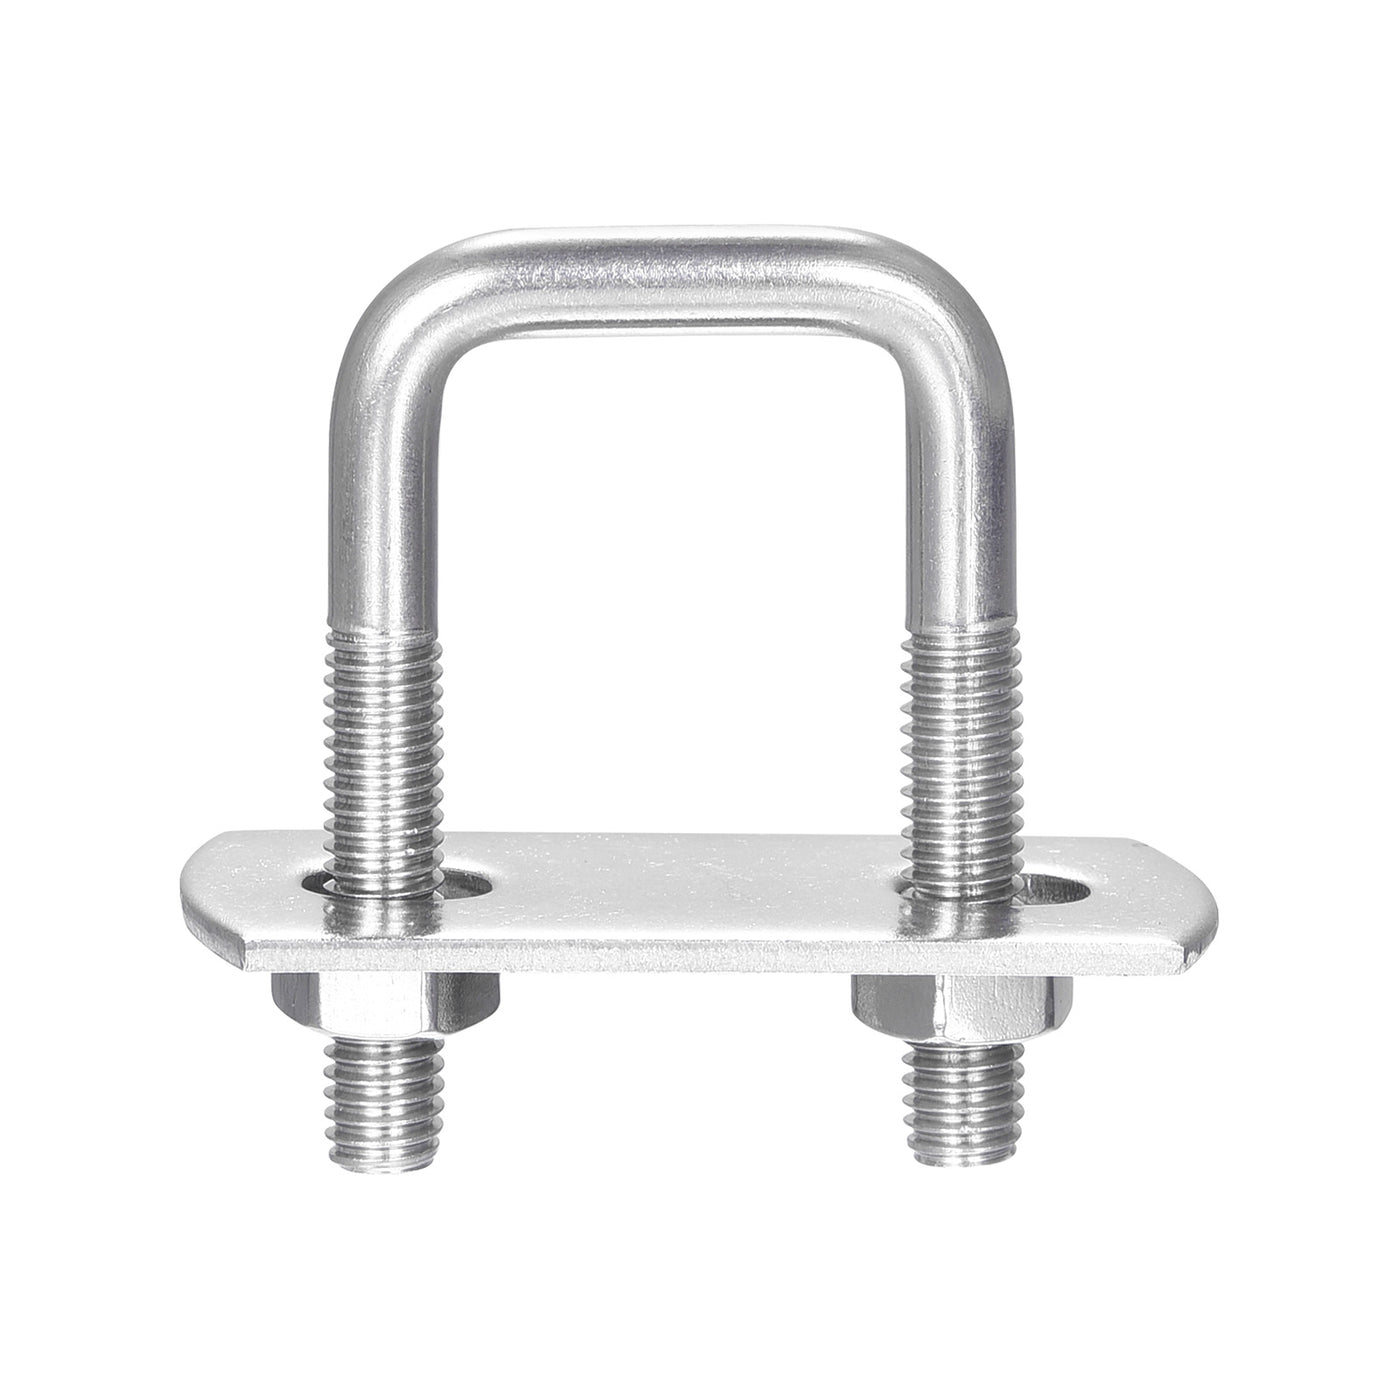 Uxcell Uxcell Square U-Bolts, 3 Sets 72mm Inner Width 100mm Length M6 with Nuts and Plates